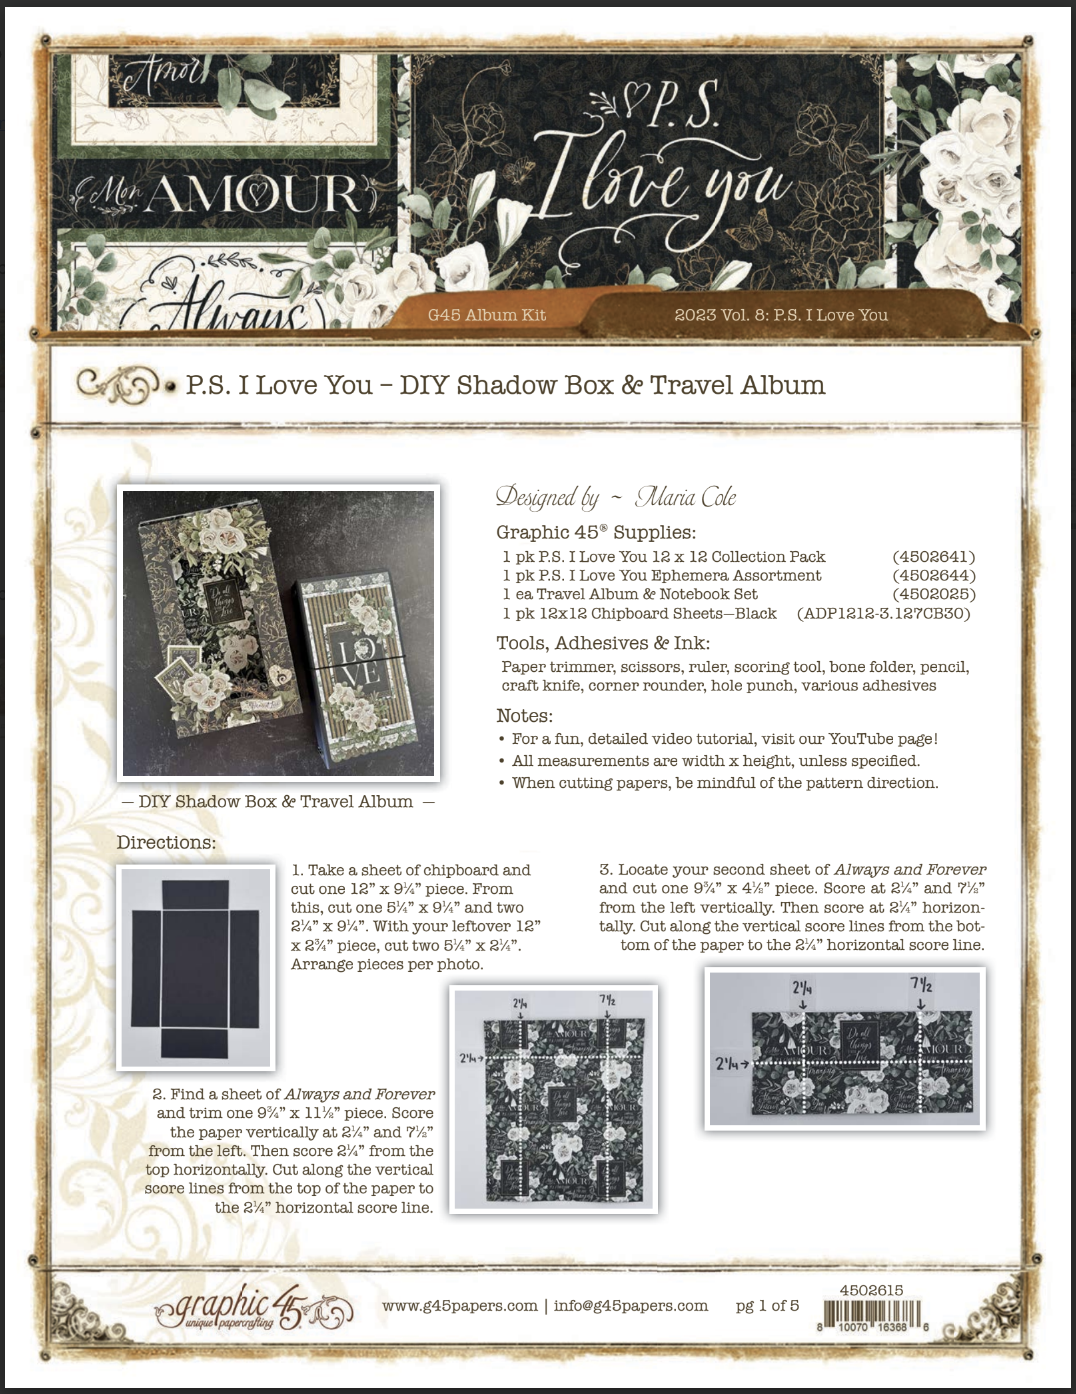 Album Kit 23 V8 – P.S. I Love You – Graphic 45 Papers